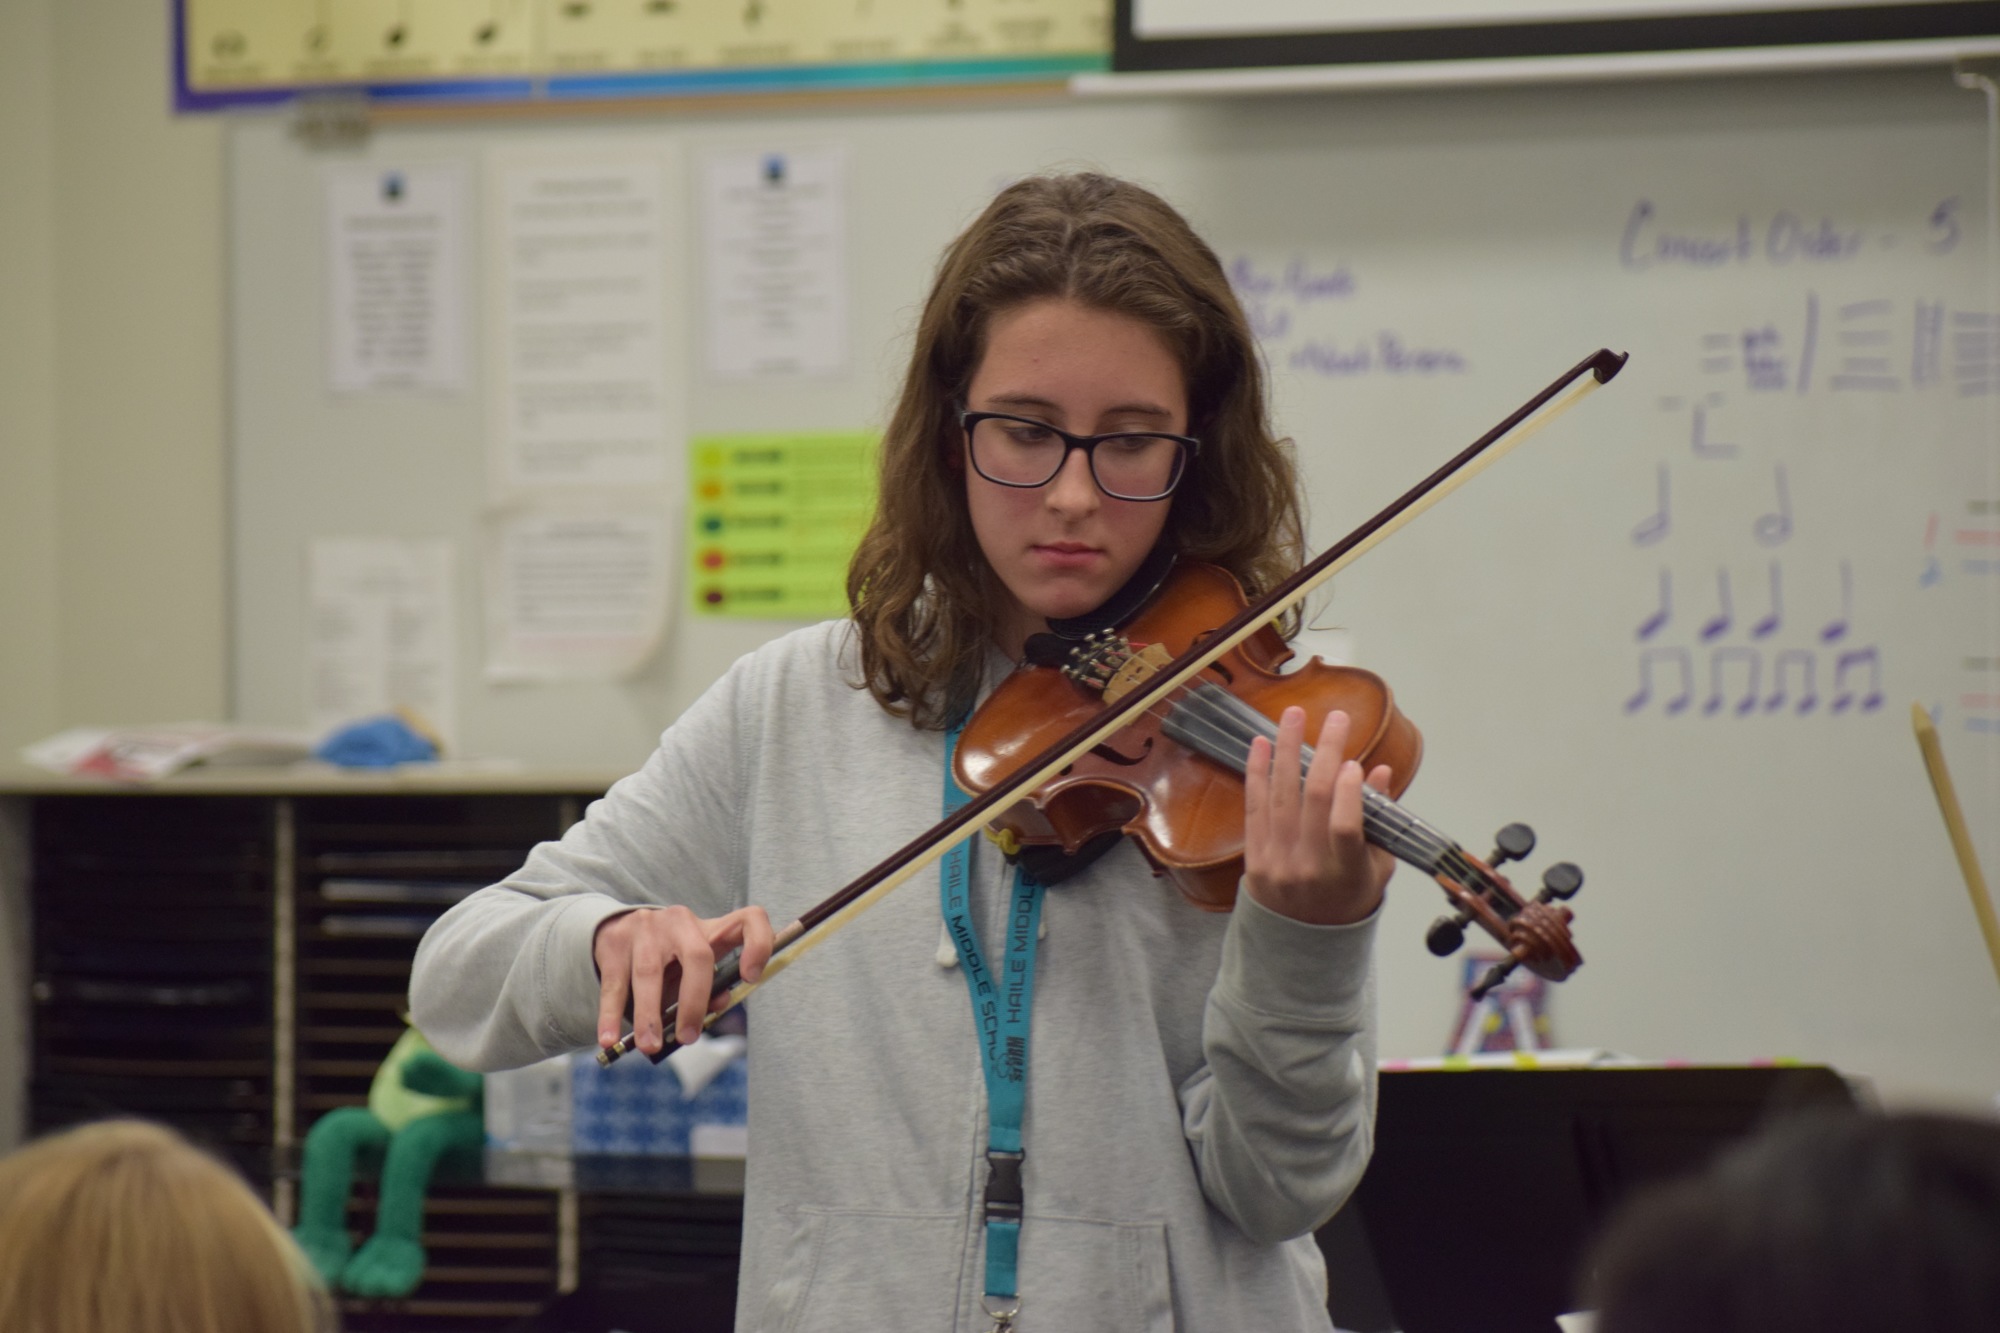 Tiffany Rock, a Carlos E. Haile Middle School seventh grader, demonstrates how to play a few measures of the song 